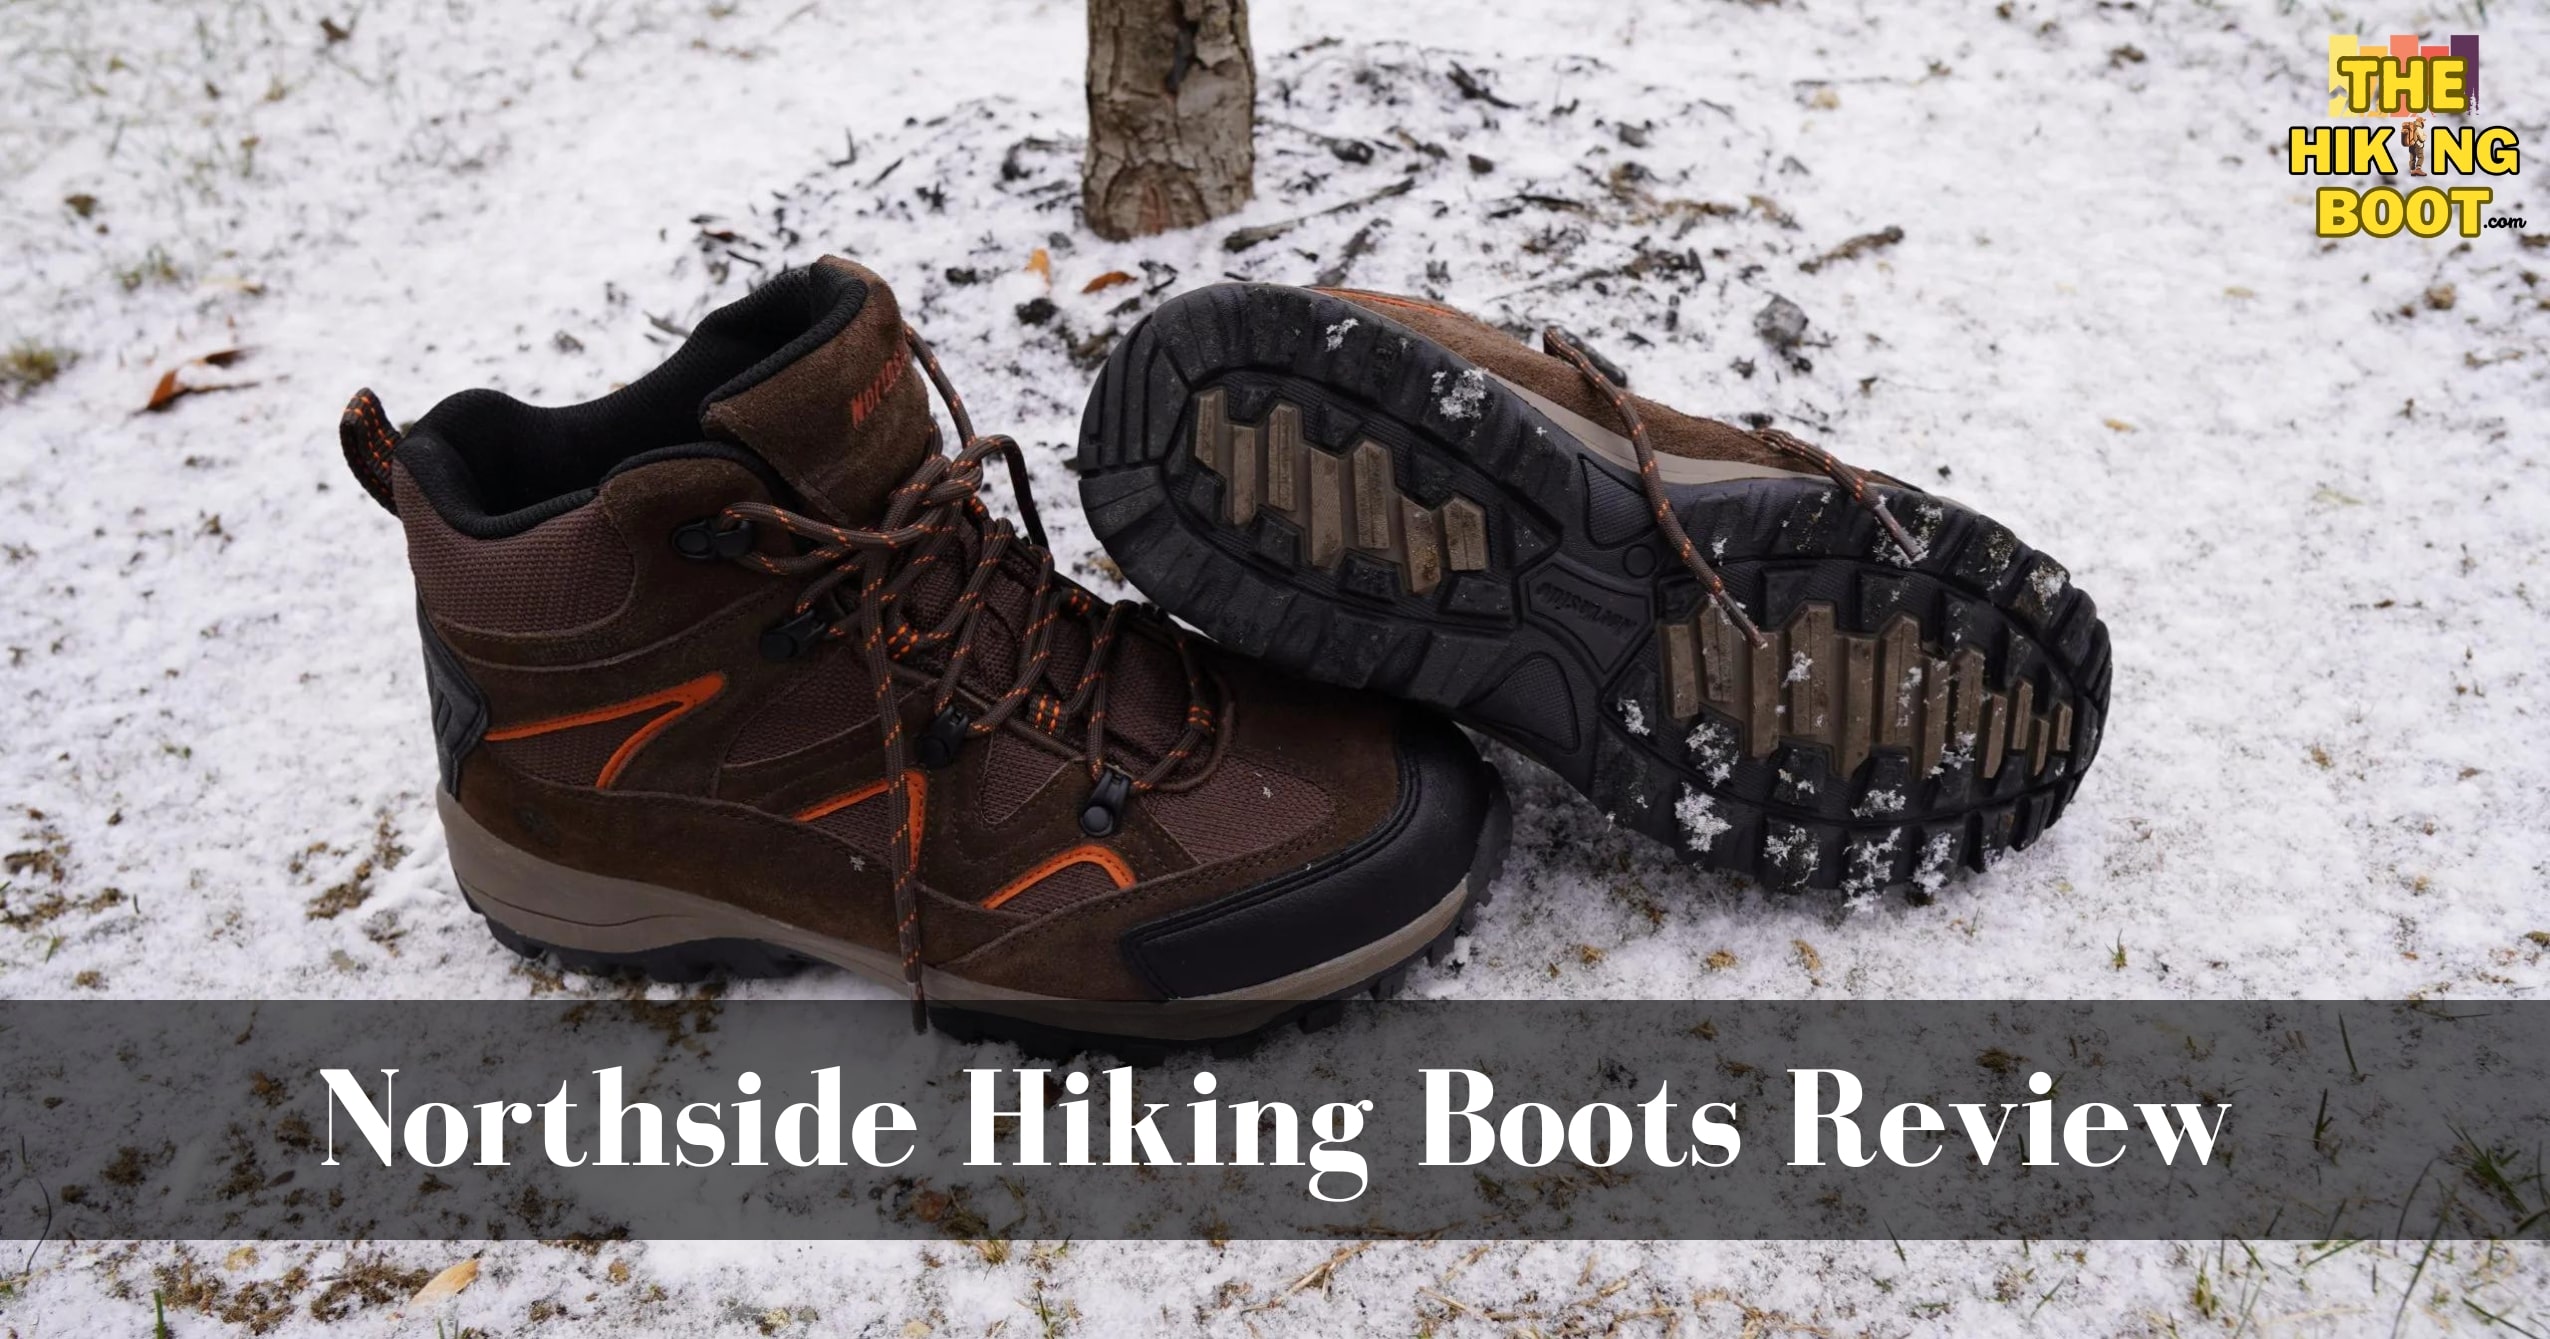 Top 3 Best Northside Hiking Boots Review - What Makes Them Special